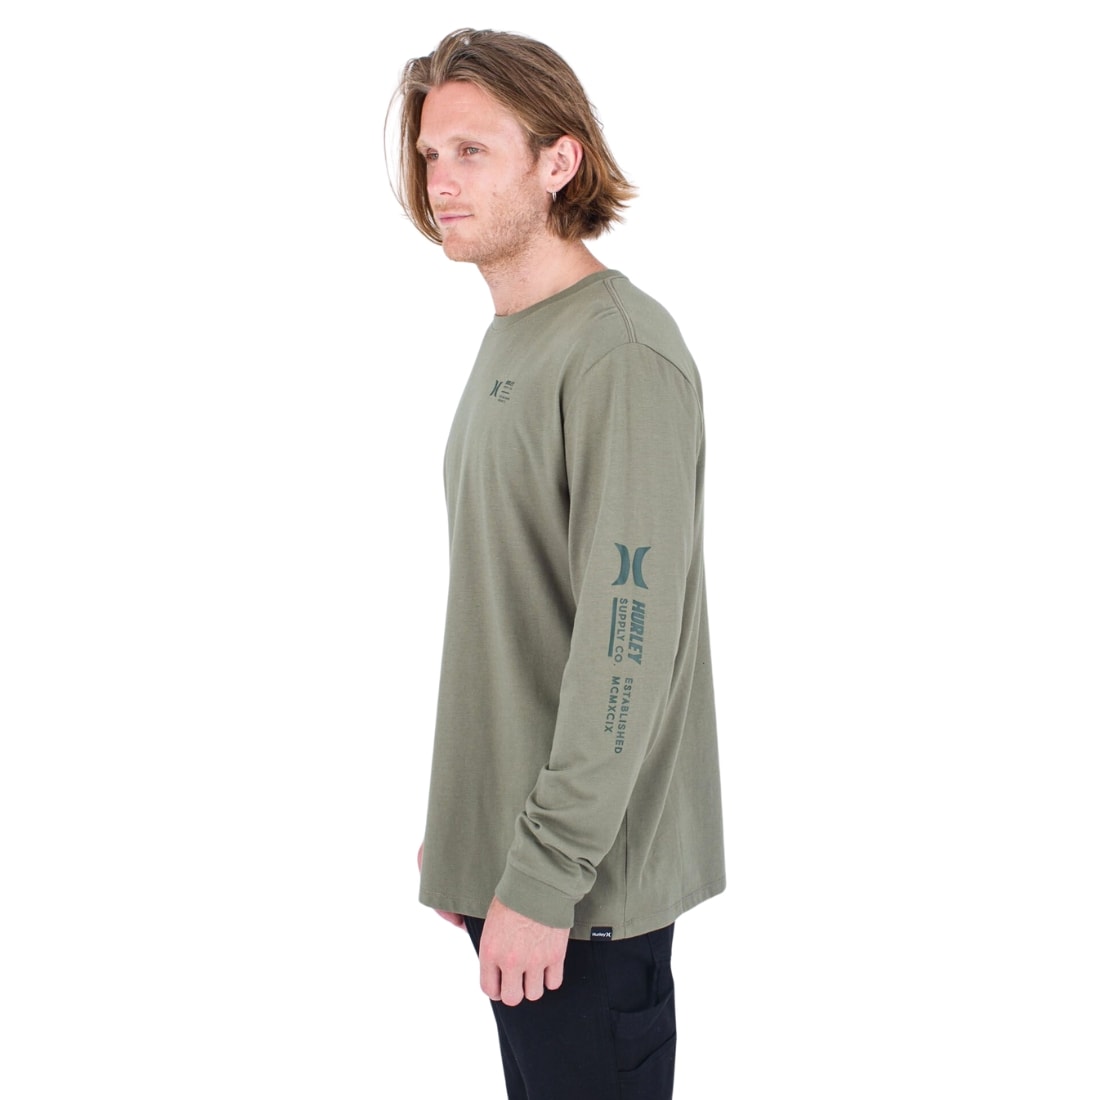 Hurley Everyday Explorer Supply Longsleeve T-Shirt - Army - Mens Surf Brand T-Shirt by Hurley